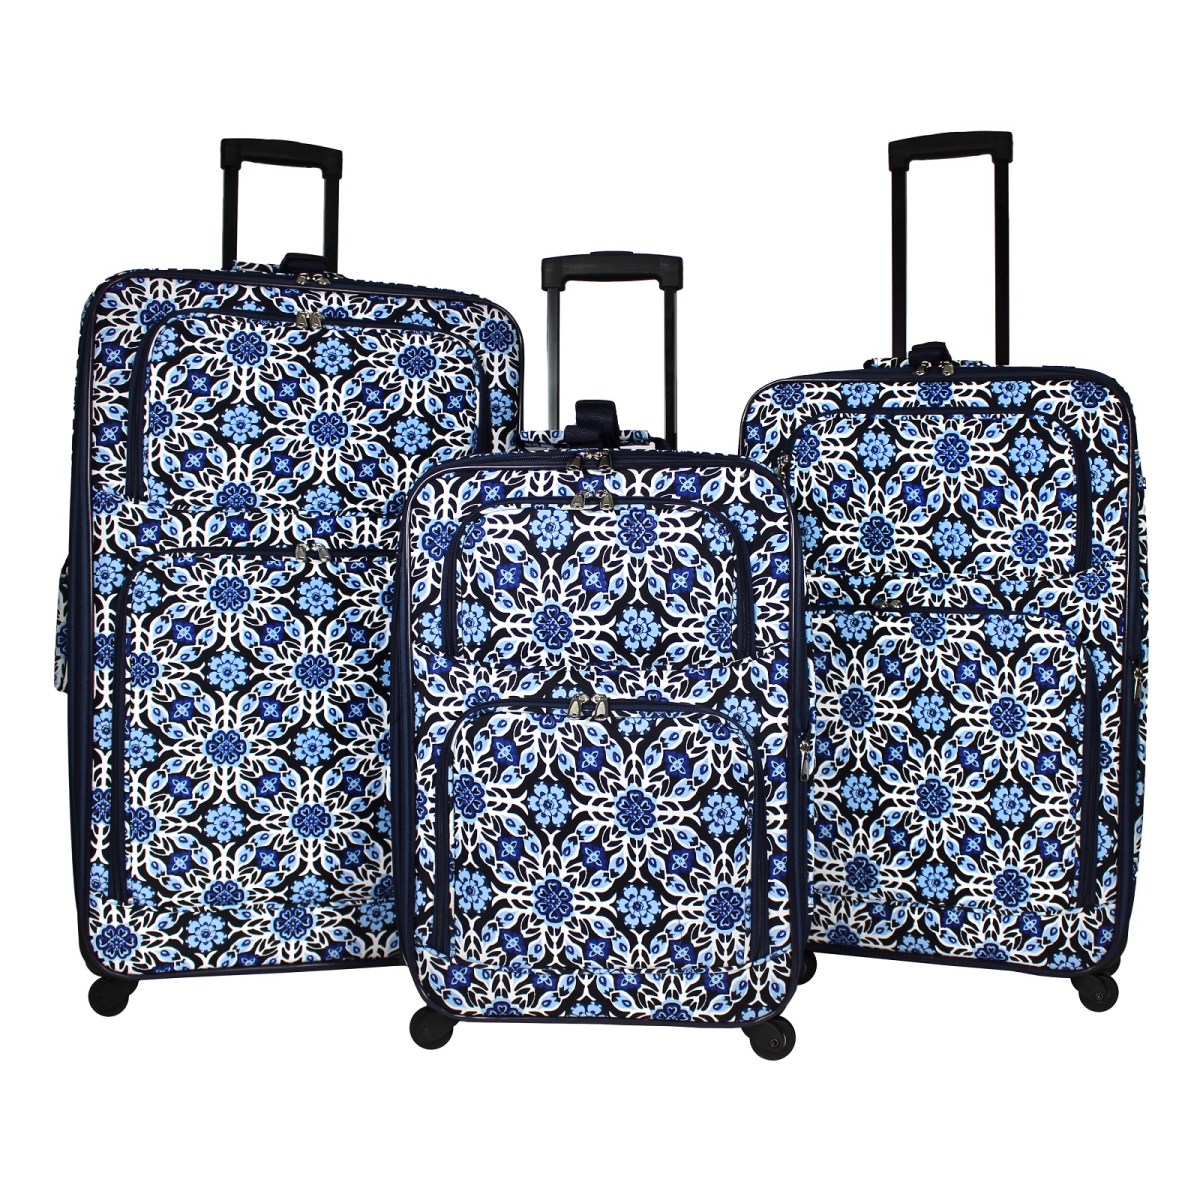 818703-213 Expandable Spinner Luggage Set, Winter Flower - 3 Piece